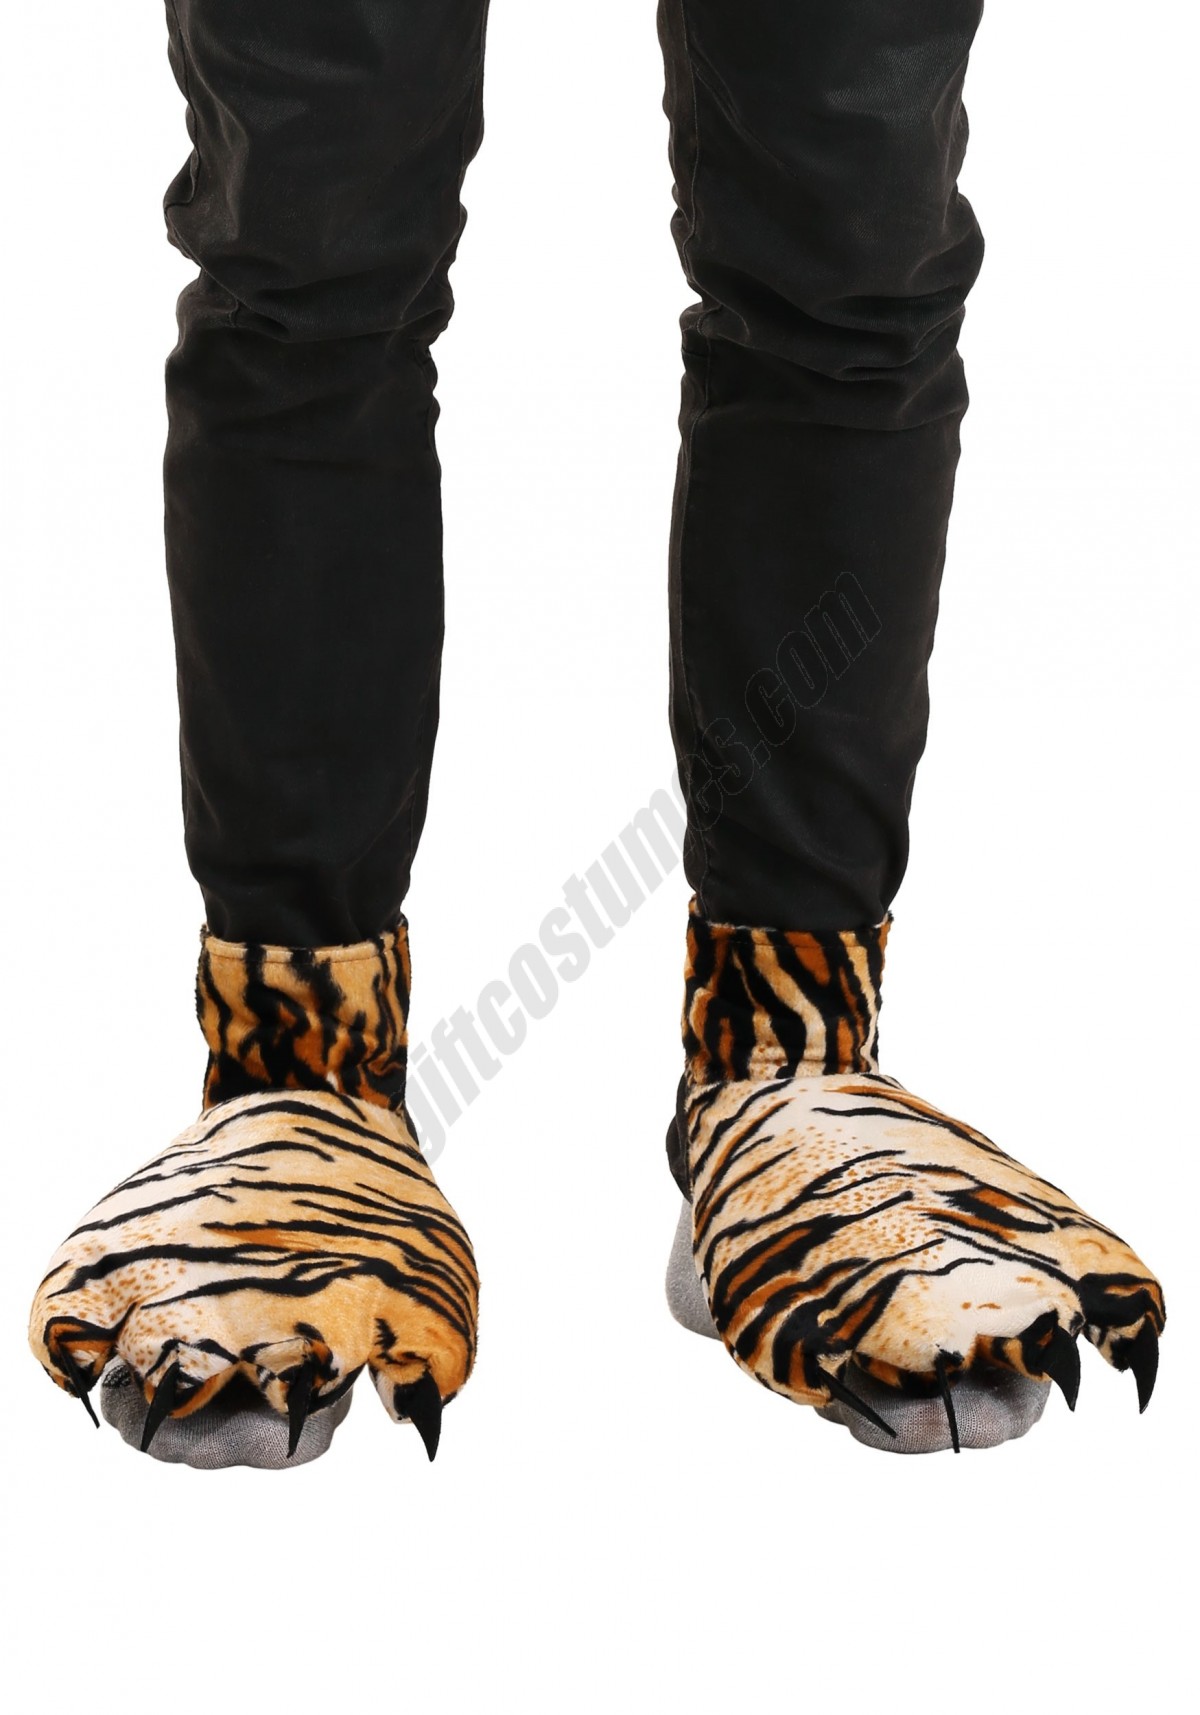 Tiger Shoe Covers Promotions - -0